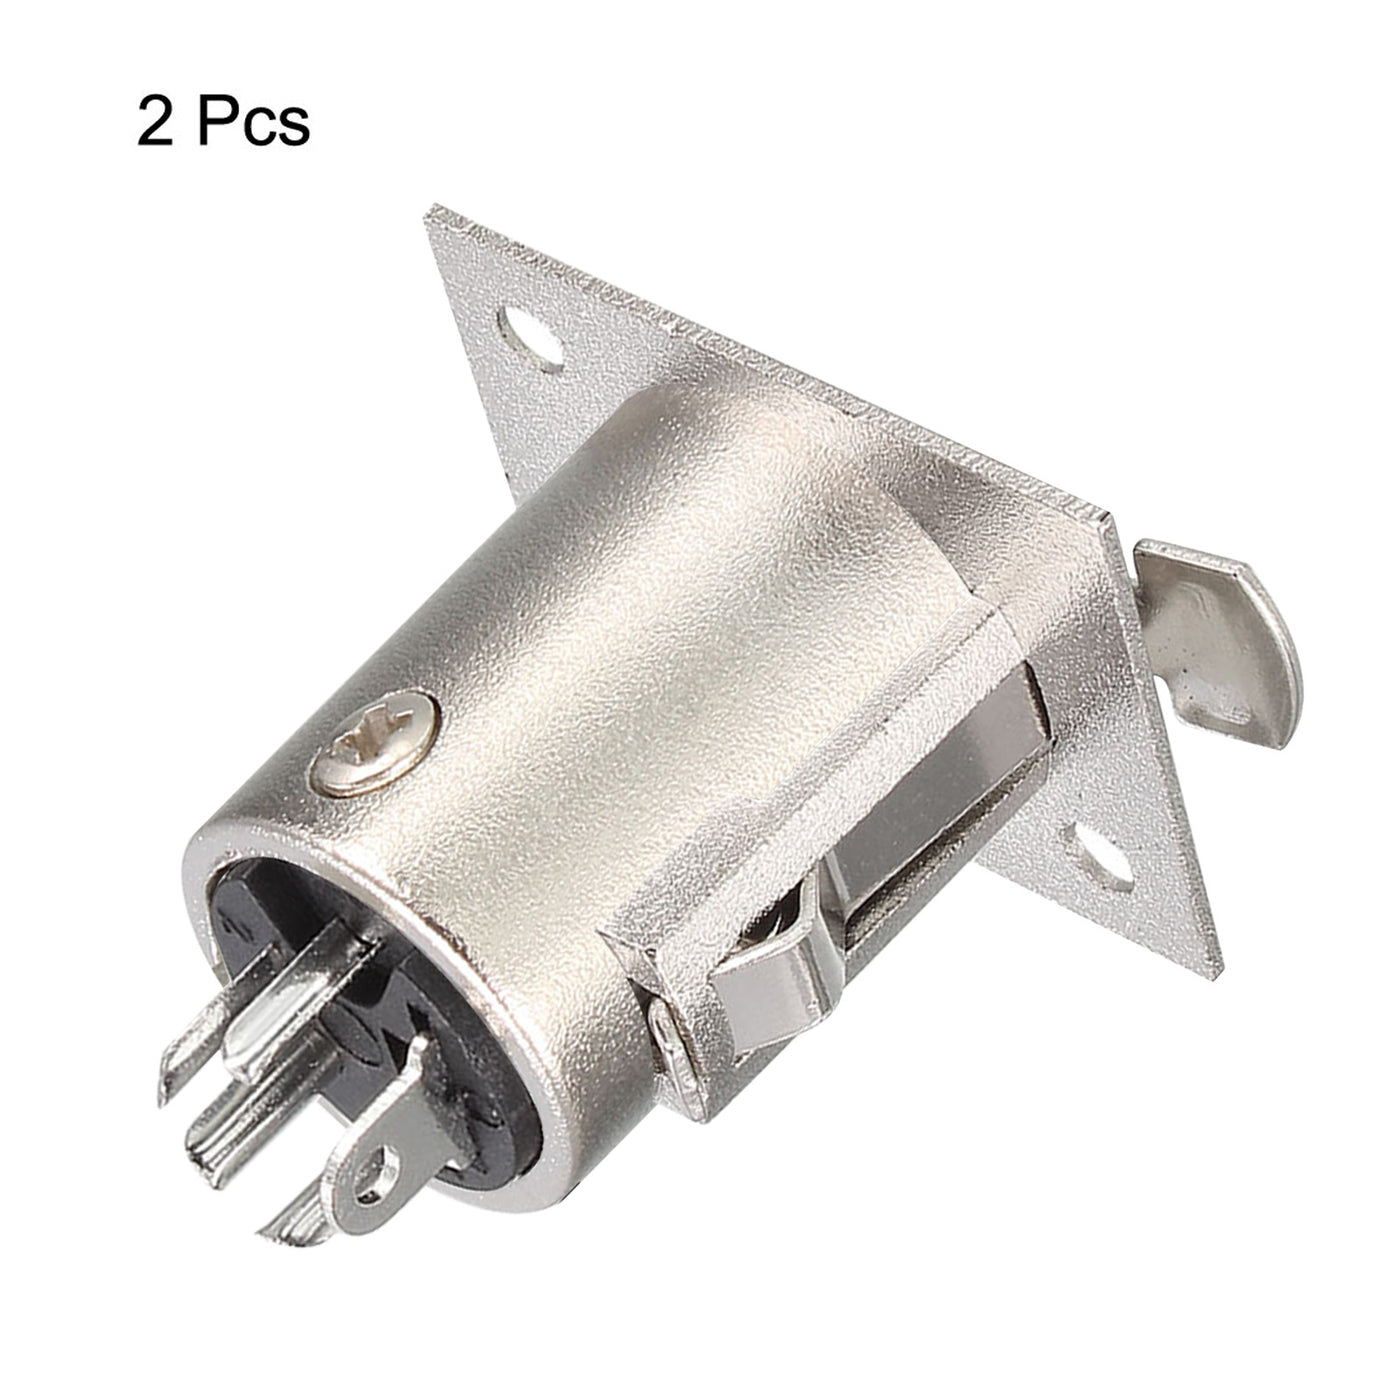 uxcell Uxcell 4-Pin XLR Female Jack Panel Mount for Microphone Connector Adapter Converter Audio Speaker Silver Tone 2Pcs YL3070-1-4P